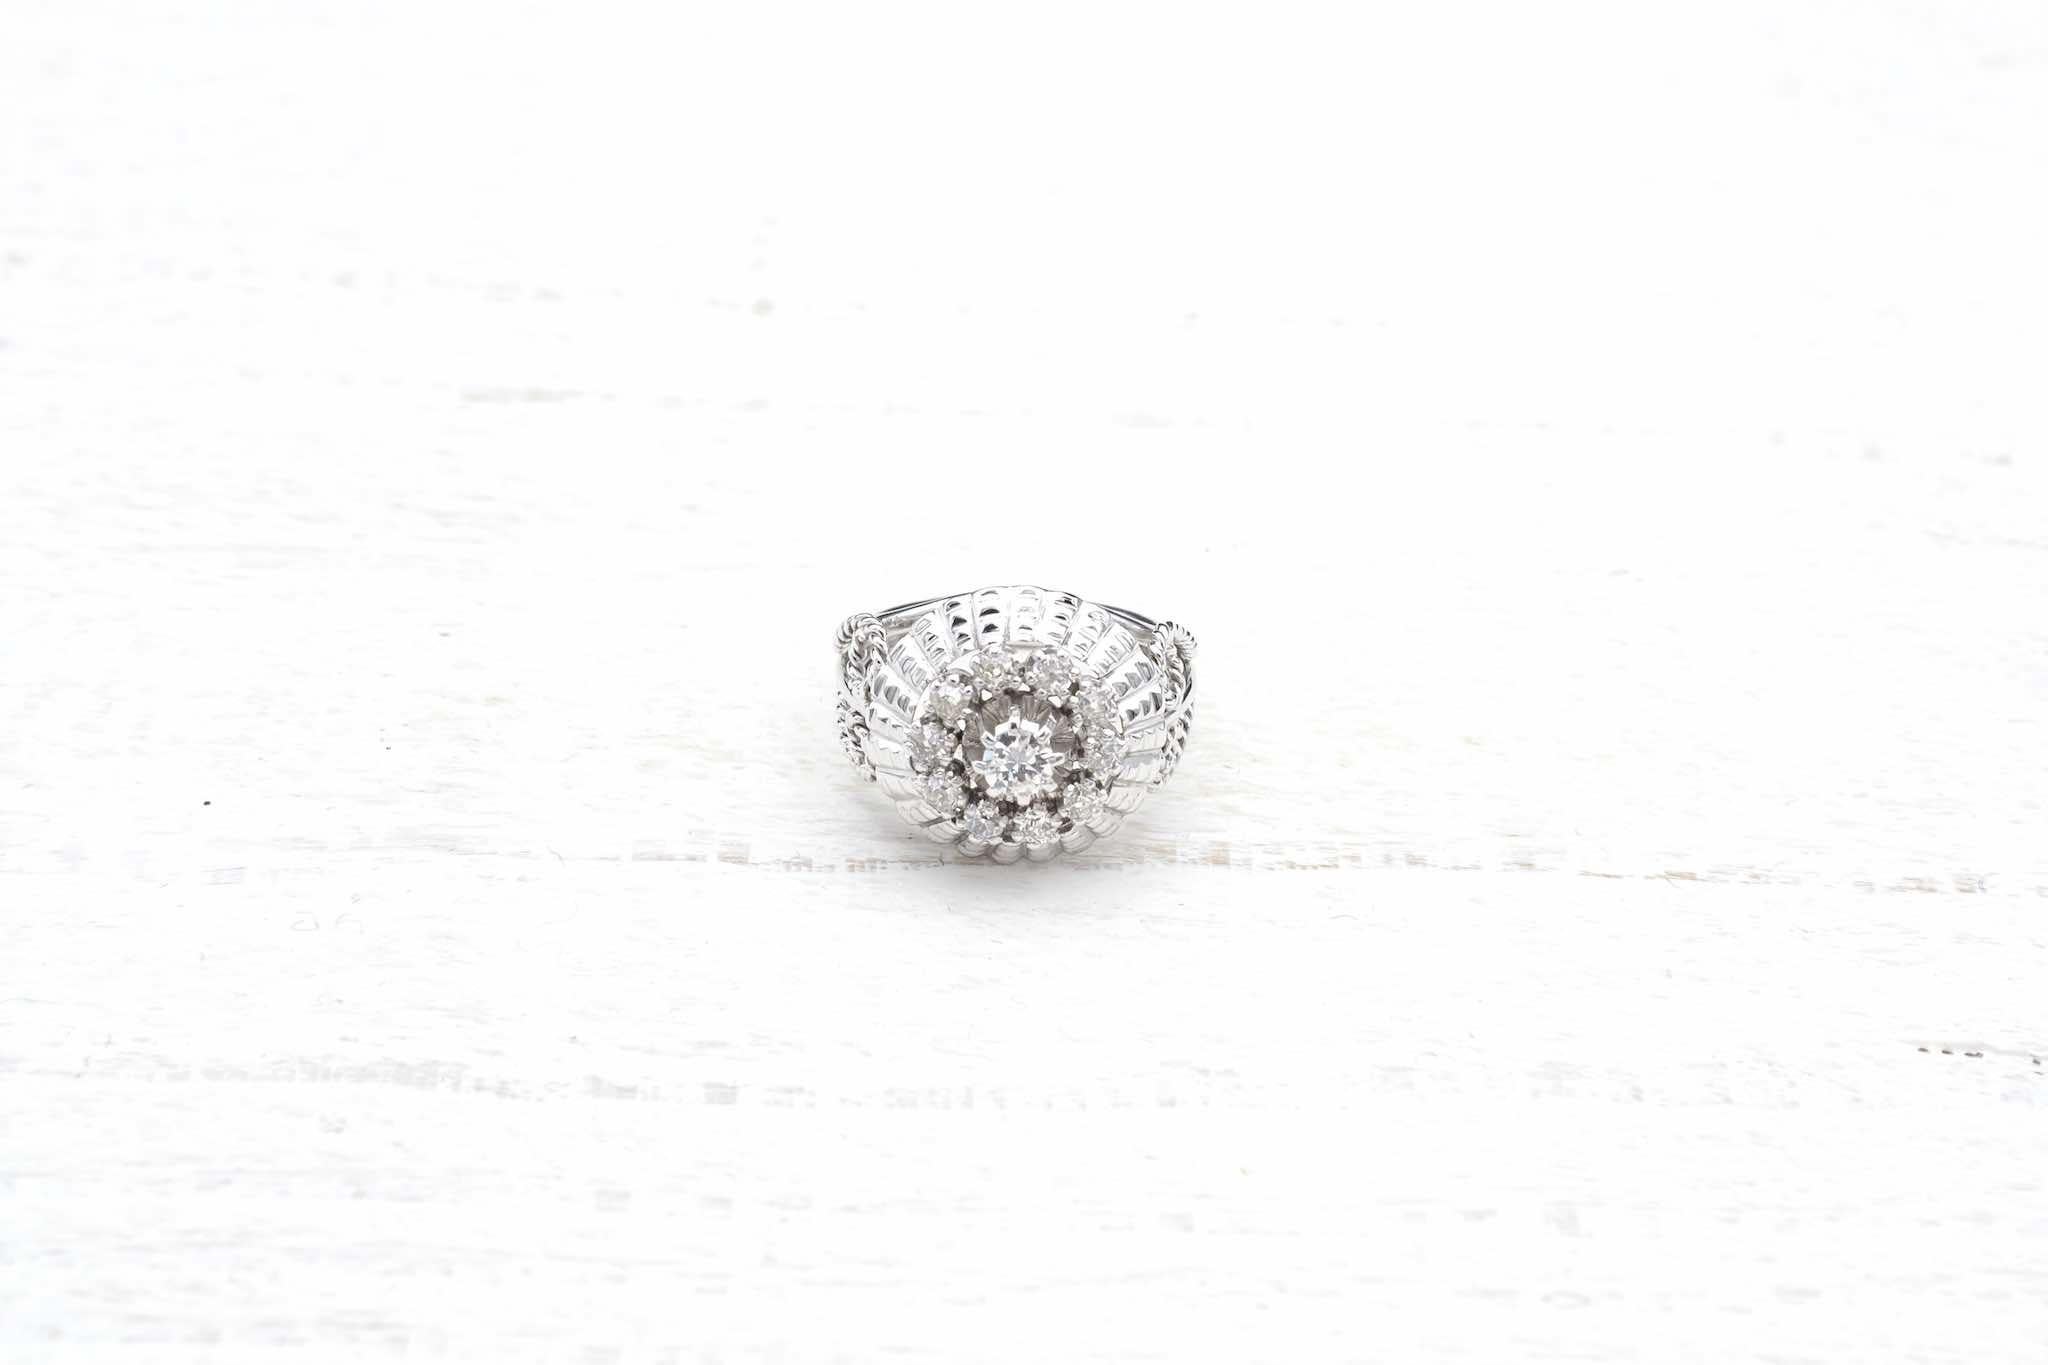 Stones: Brilliant cut diamonds for a total weight of 0.50 carat.
Material: 18k white gold
Dimensions: 8 mm in height, 17 mm in diameter.
Period: 1950
Weight: 8g
Size: 56 (free sizing)
Certificate
Ref. : 23794 HD